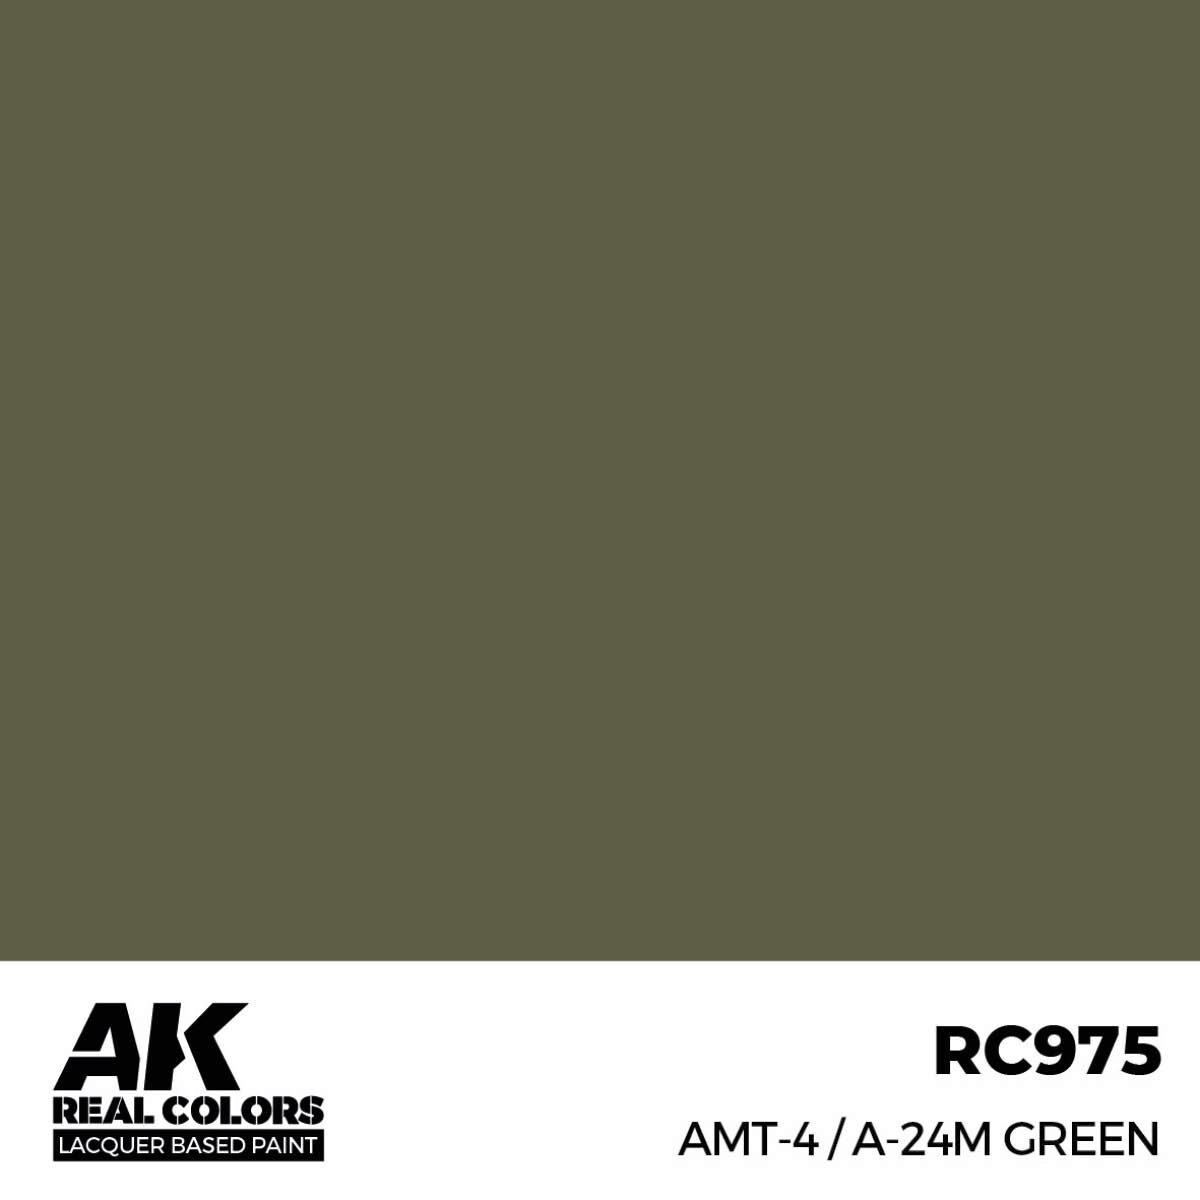 AK RC975 Real Colors AMT-4 / A-24M Green 17 ml.